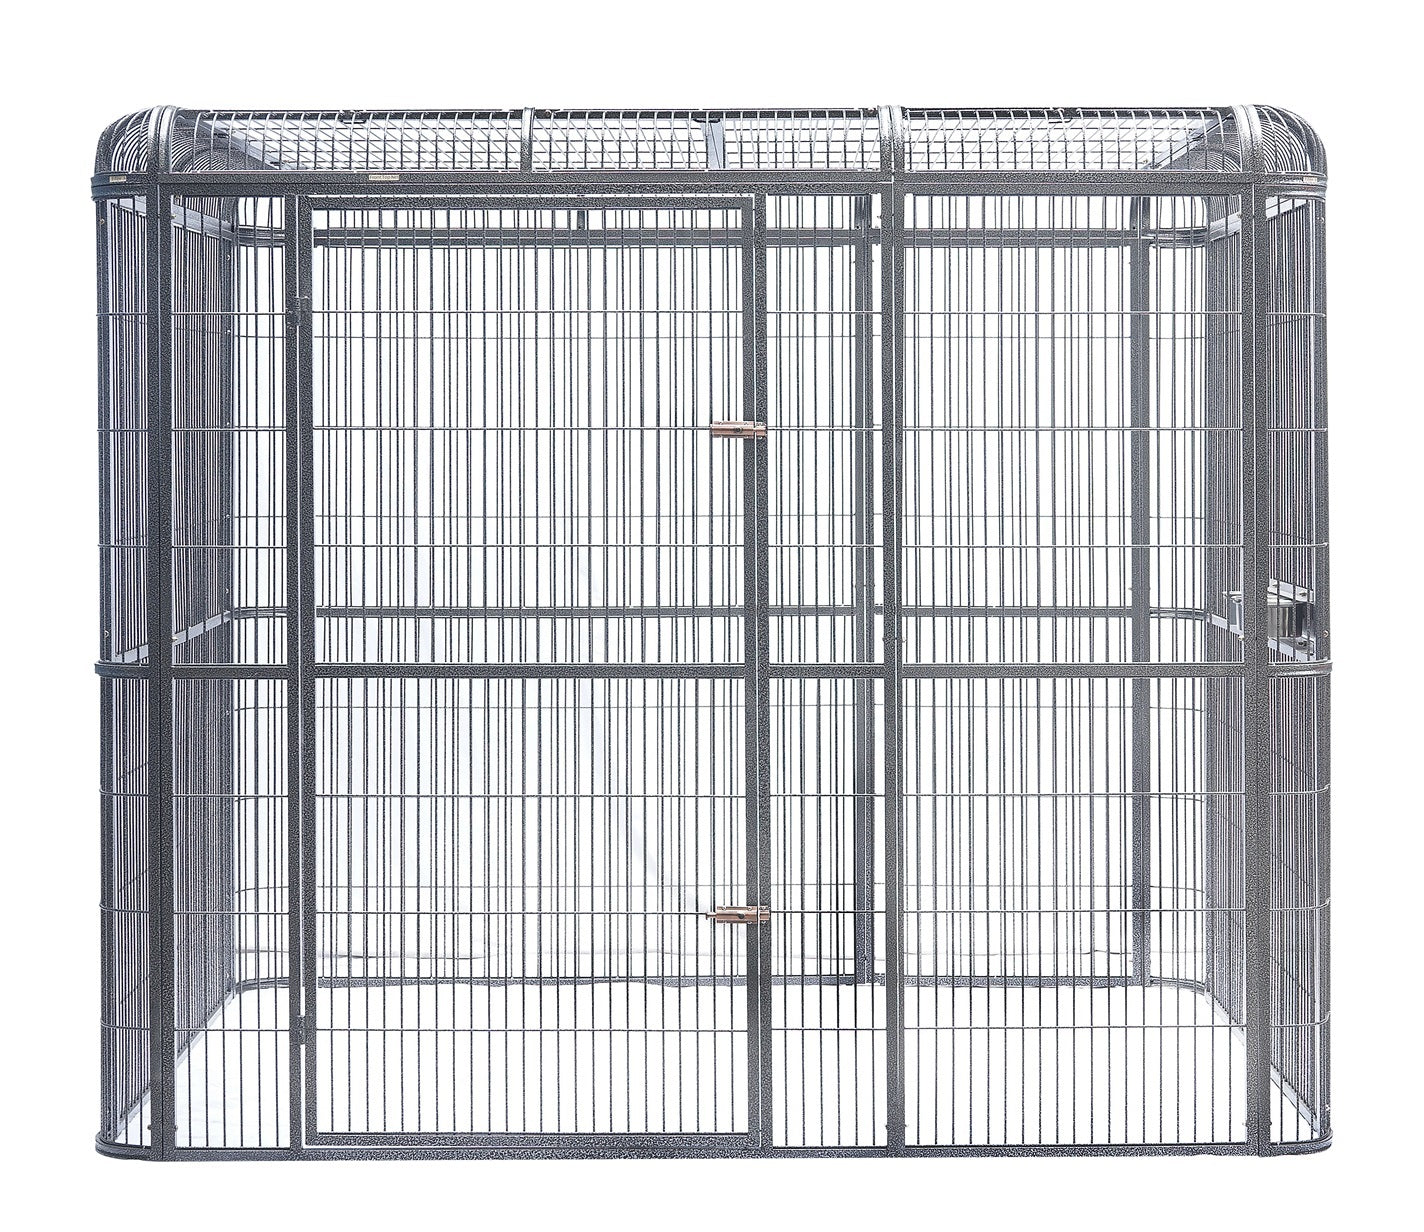 XXXXL Walk-in Bird Cat Dog Cage Pet Parrot Aviary  Perch 219x158x203cm With Green Cover